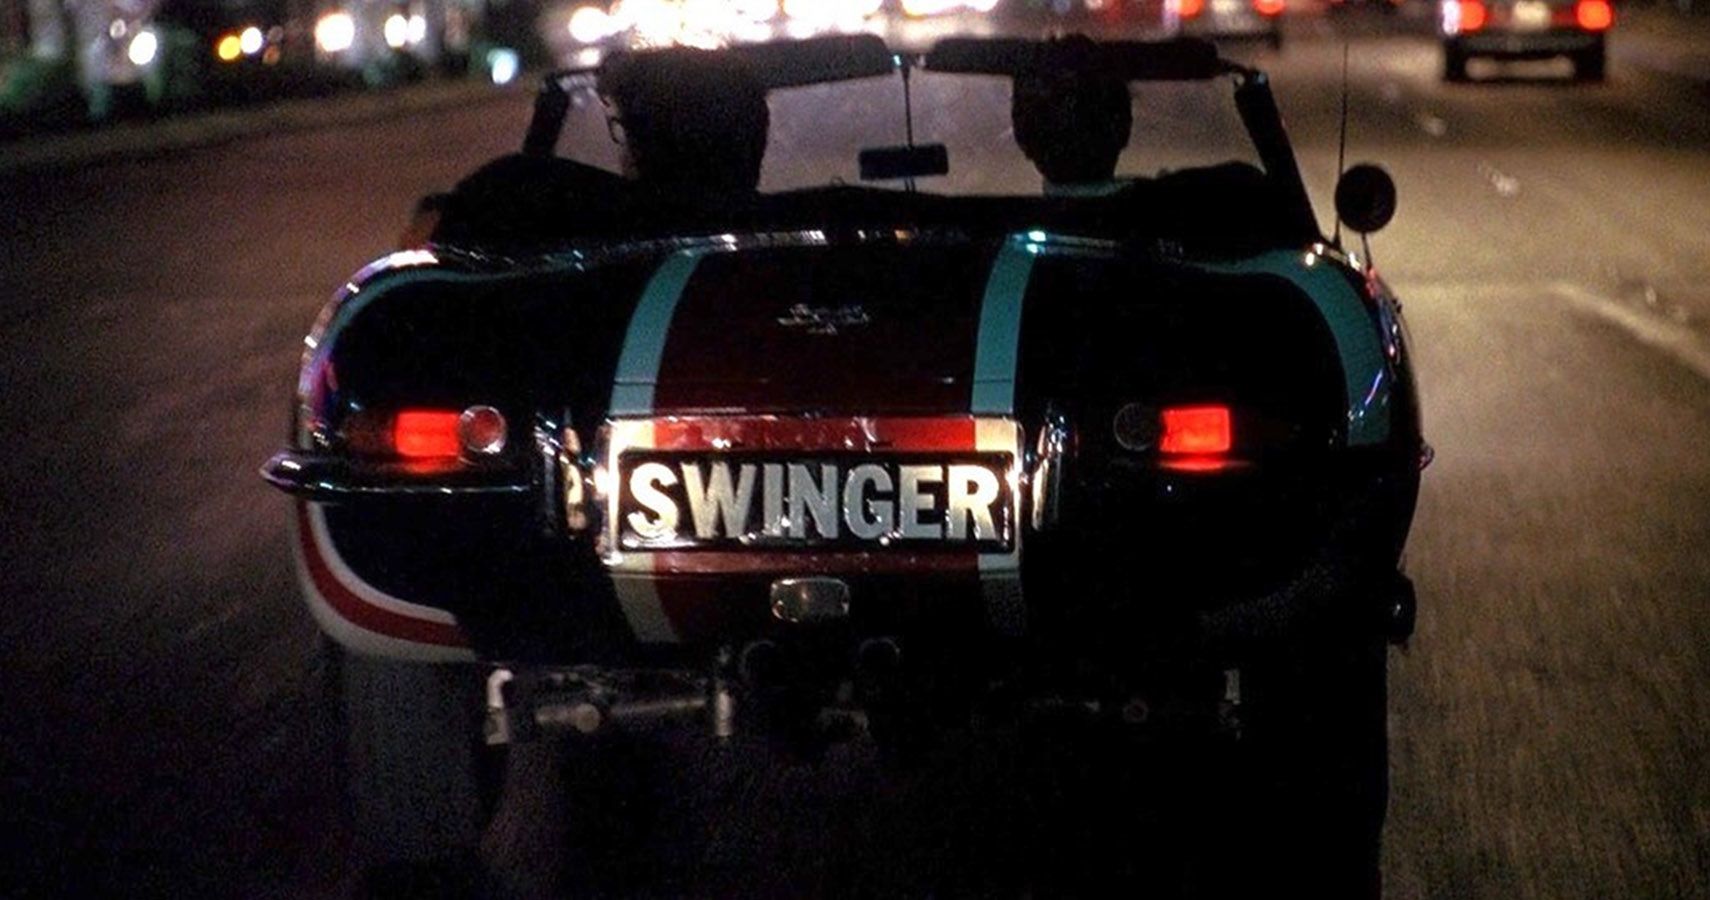 The Word “Swinger” Was Emblazoned On The Hood Of The Jaguar E-Type From Austin Powers